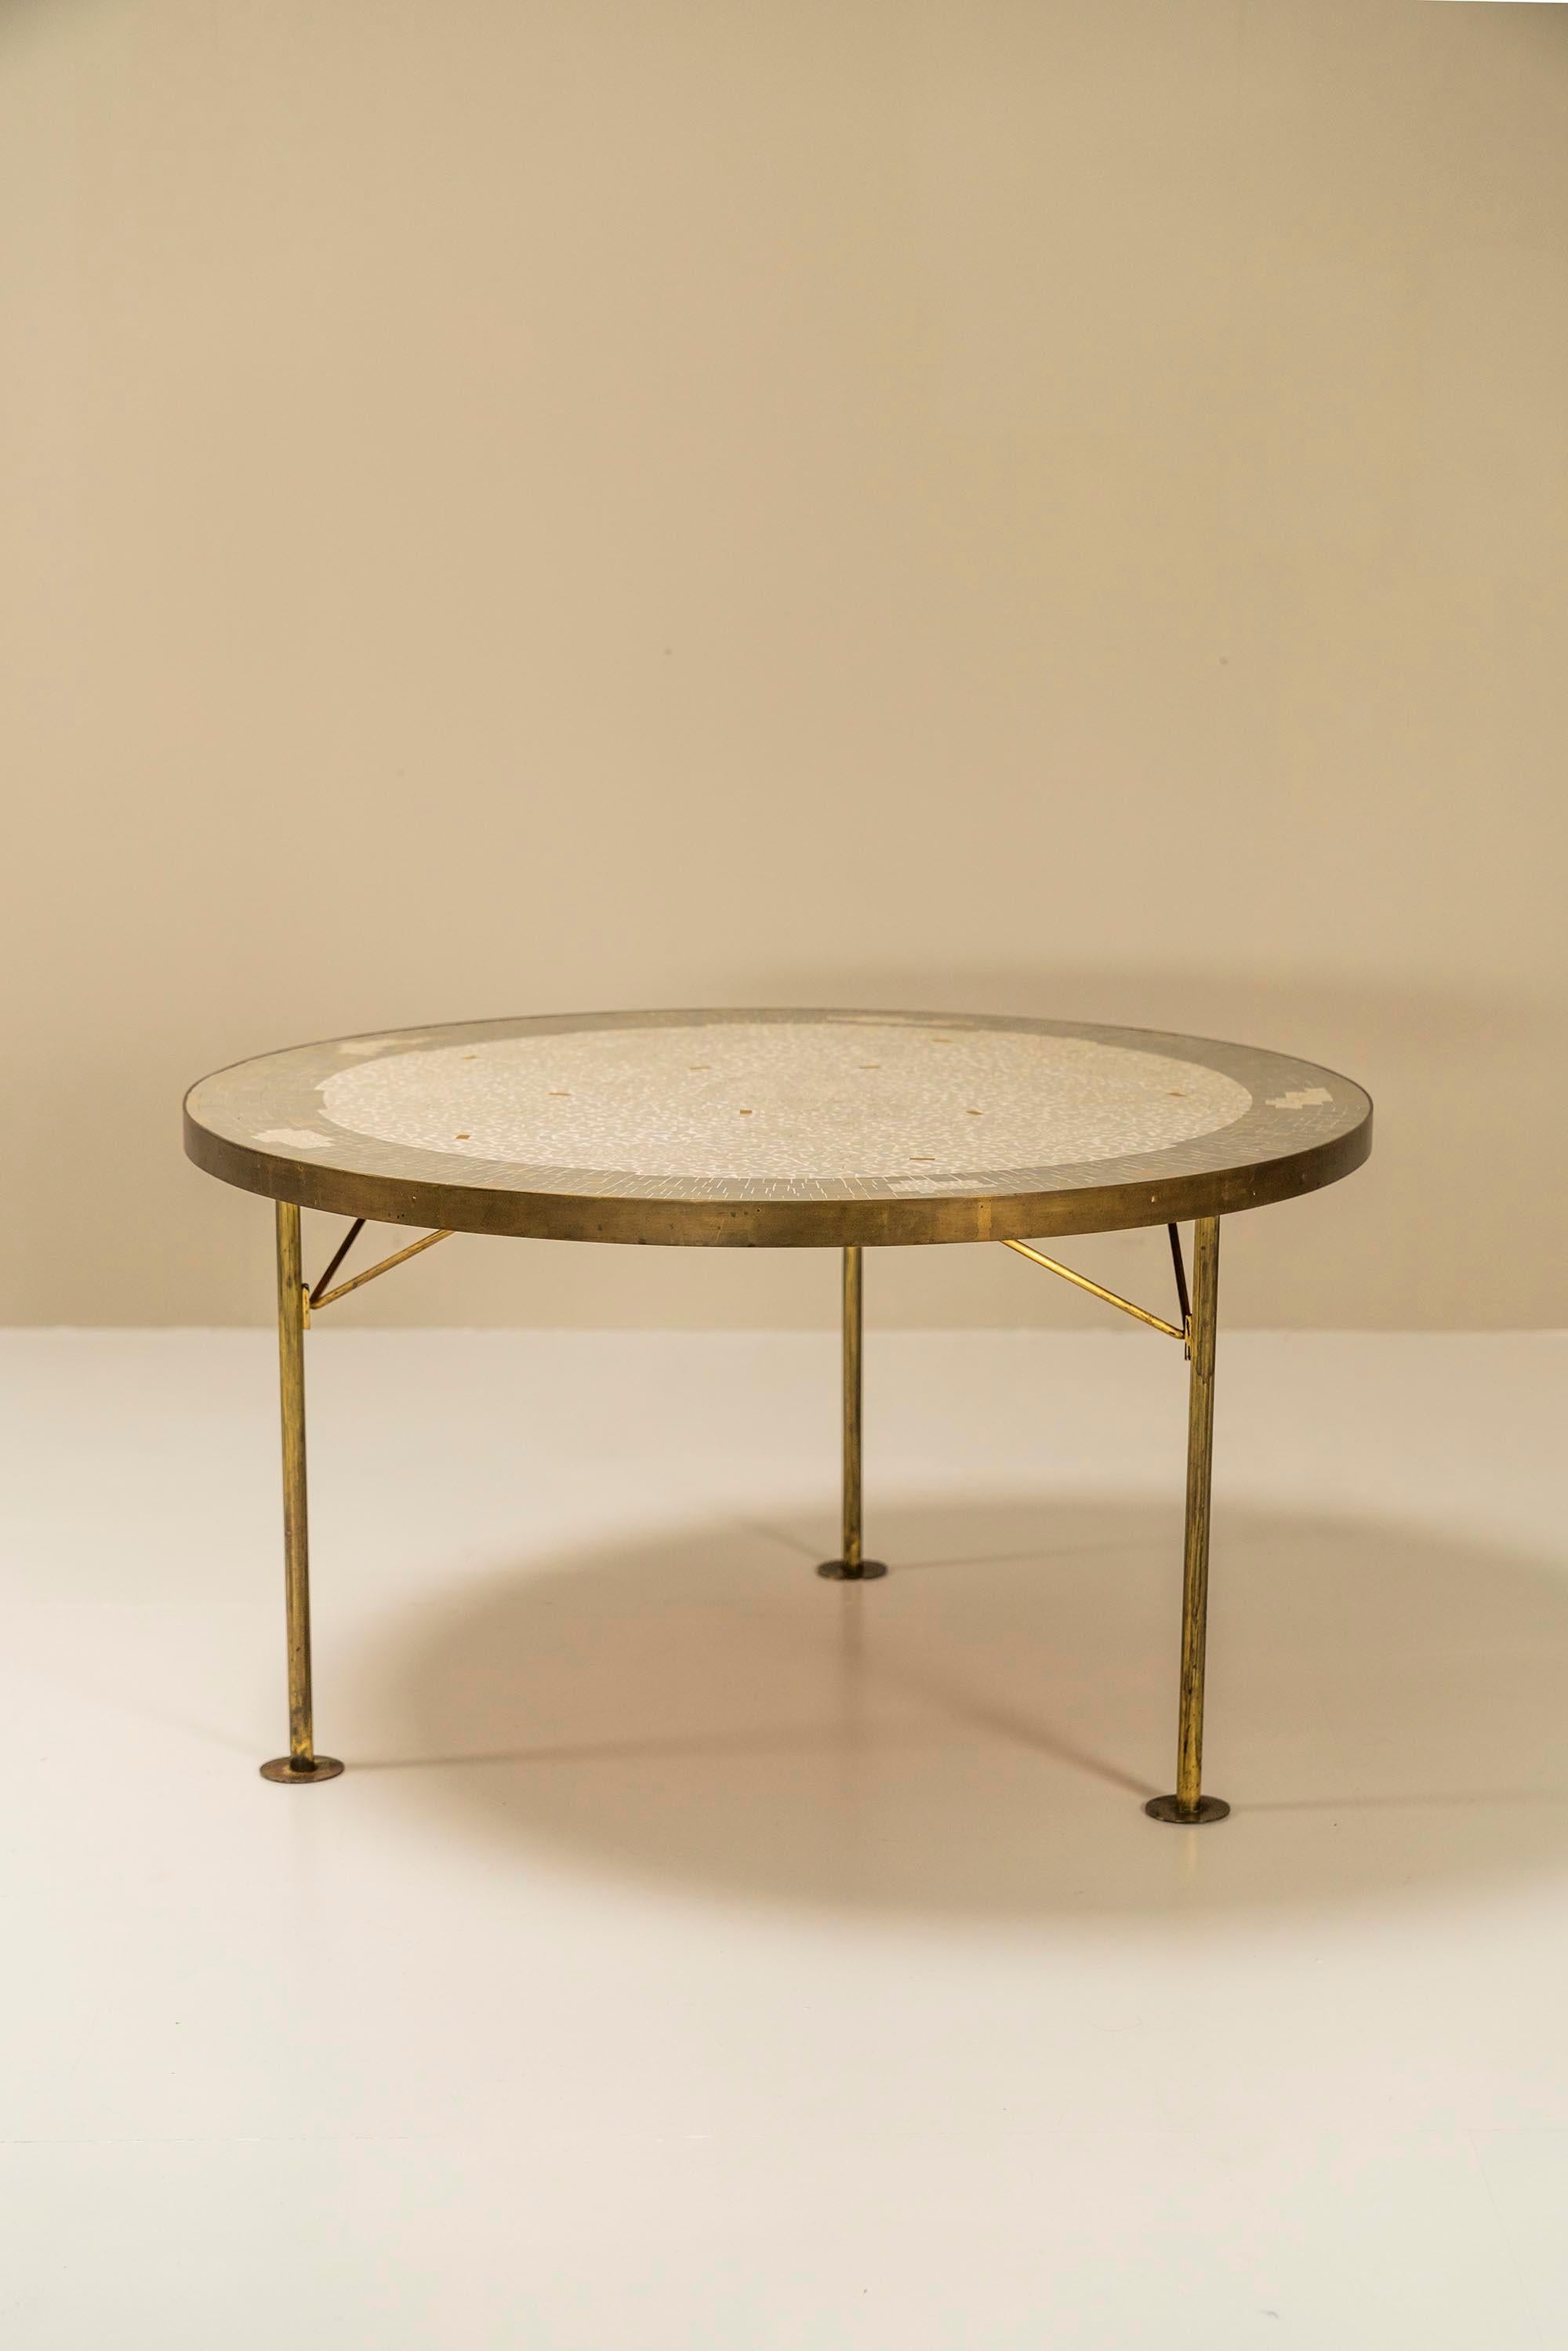 Nice Round Mosaic coffee table by Berthold Müller-Oerlinghausen from Germany, ca 1960s. This mosaic coffee table has a brass frame with three legs. The mosaic top has an abstract pattern is a mix of white yellow and grey stones. All his impressive